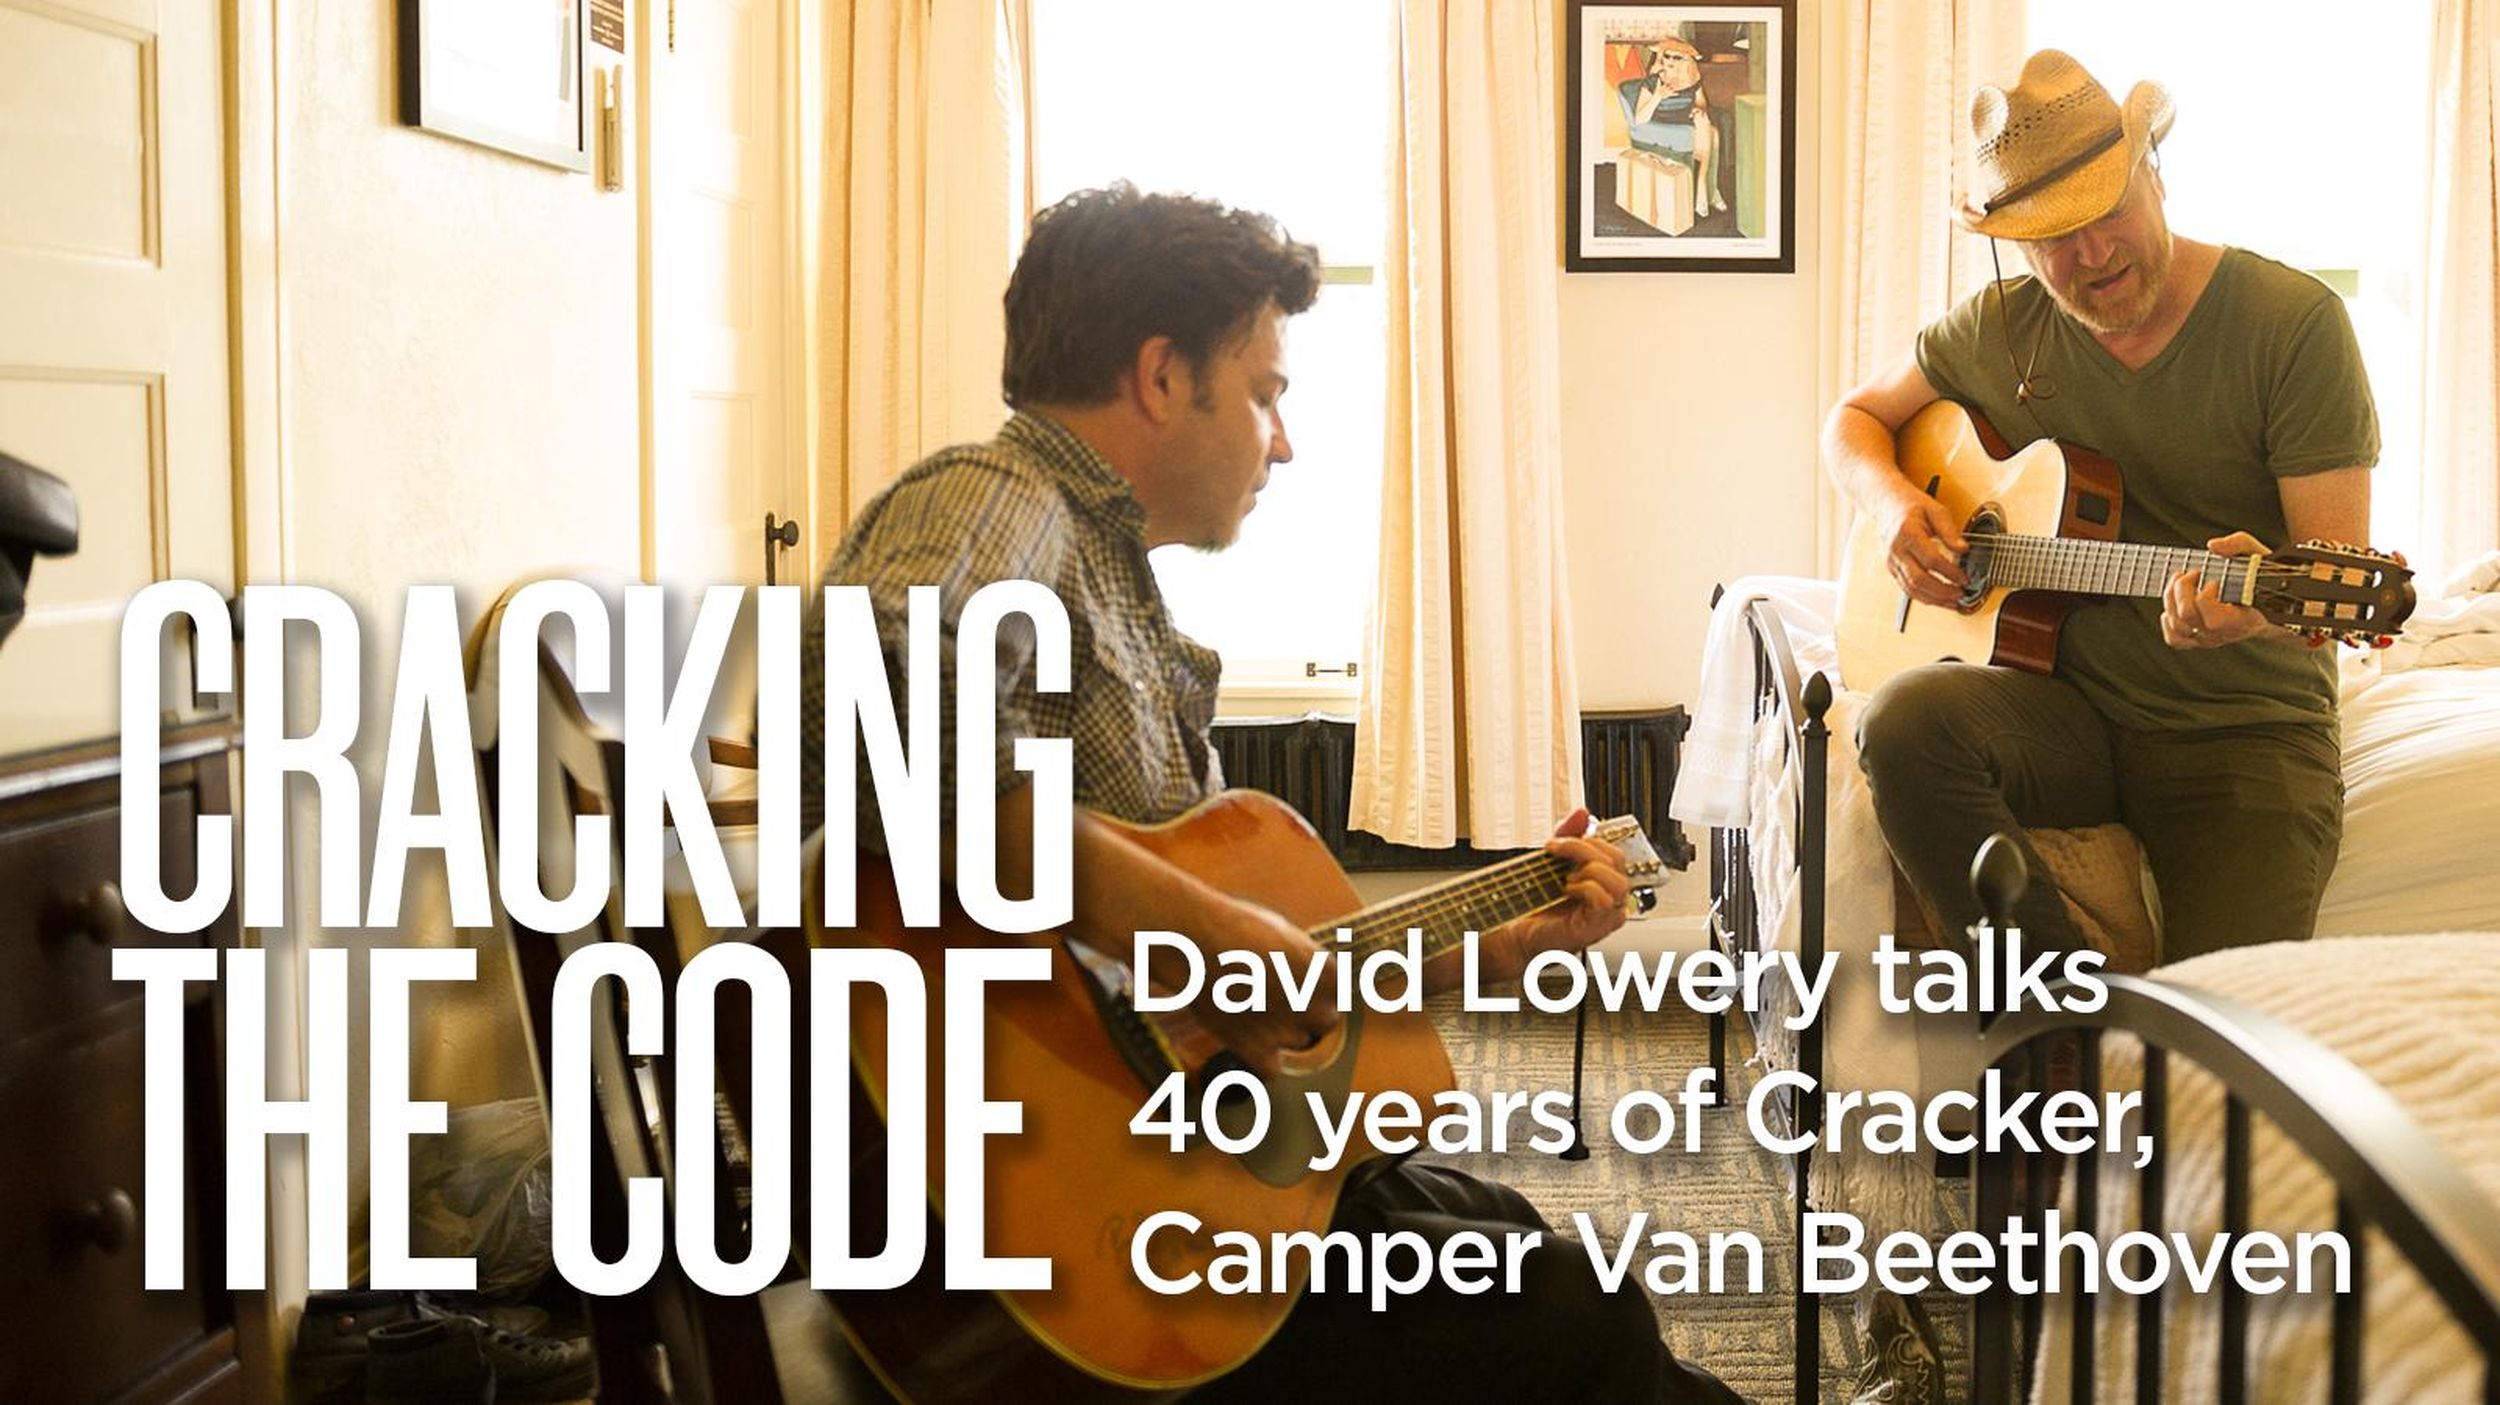 Cracking The Code Founder David Lowery Talks Nearly 40 Years Of Cracker Camper Van Beethoven The Spokesman Review - tornado siren not loud at all roblox id rmusic coder